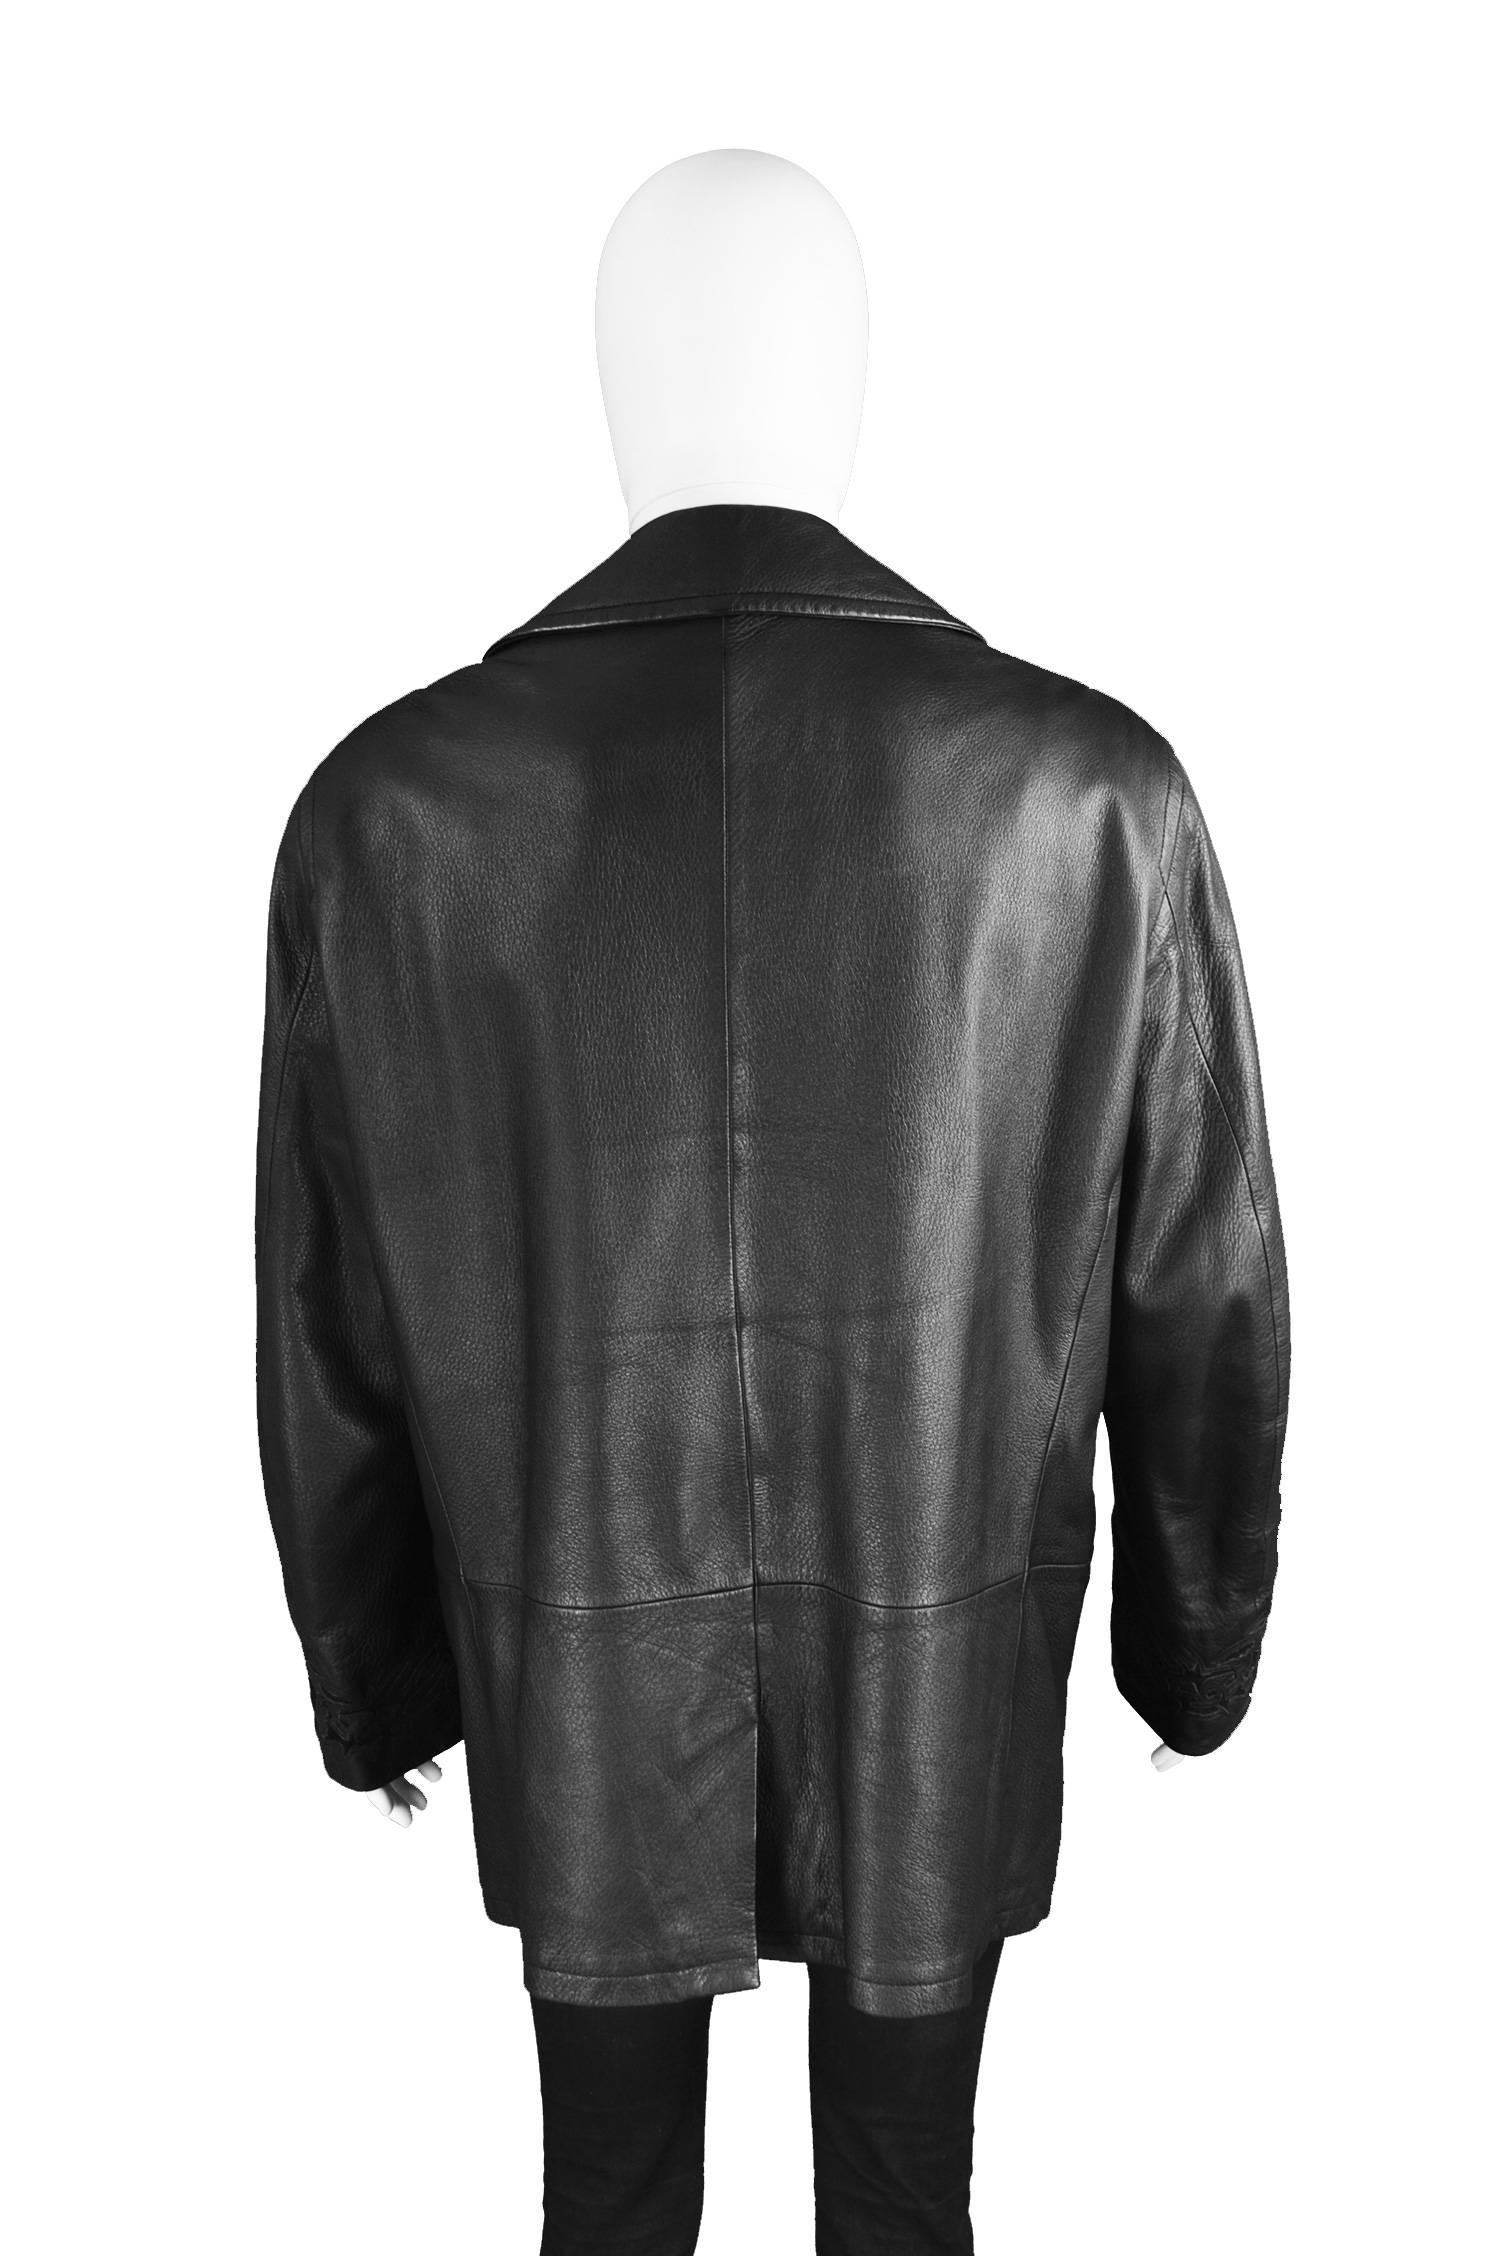 Gianni Versace Men's Black Leather Double Breasted Jacket, A/W 2002  6